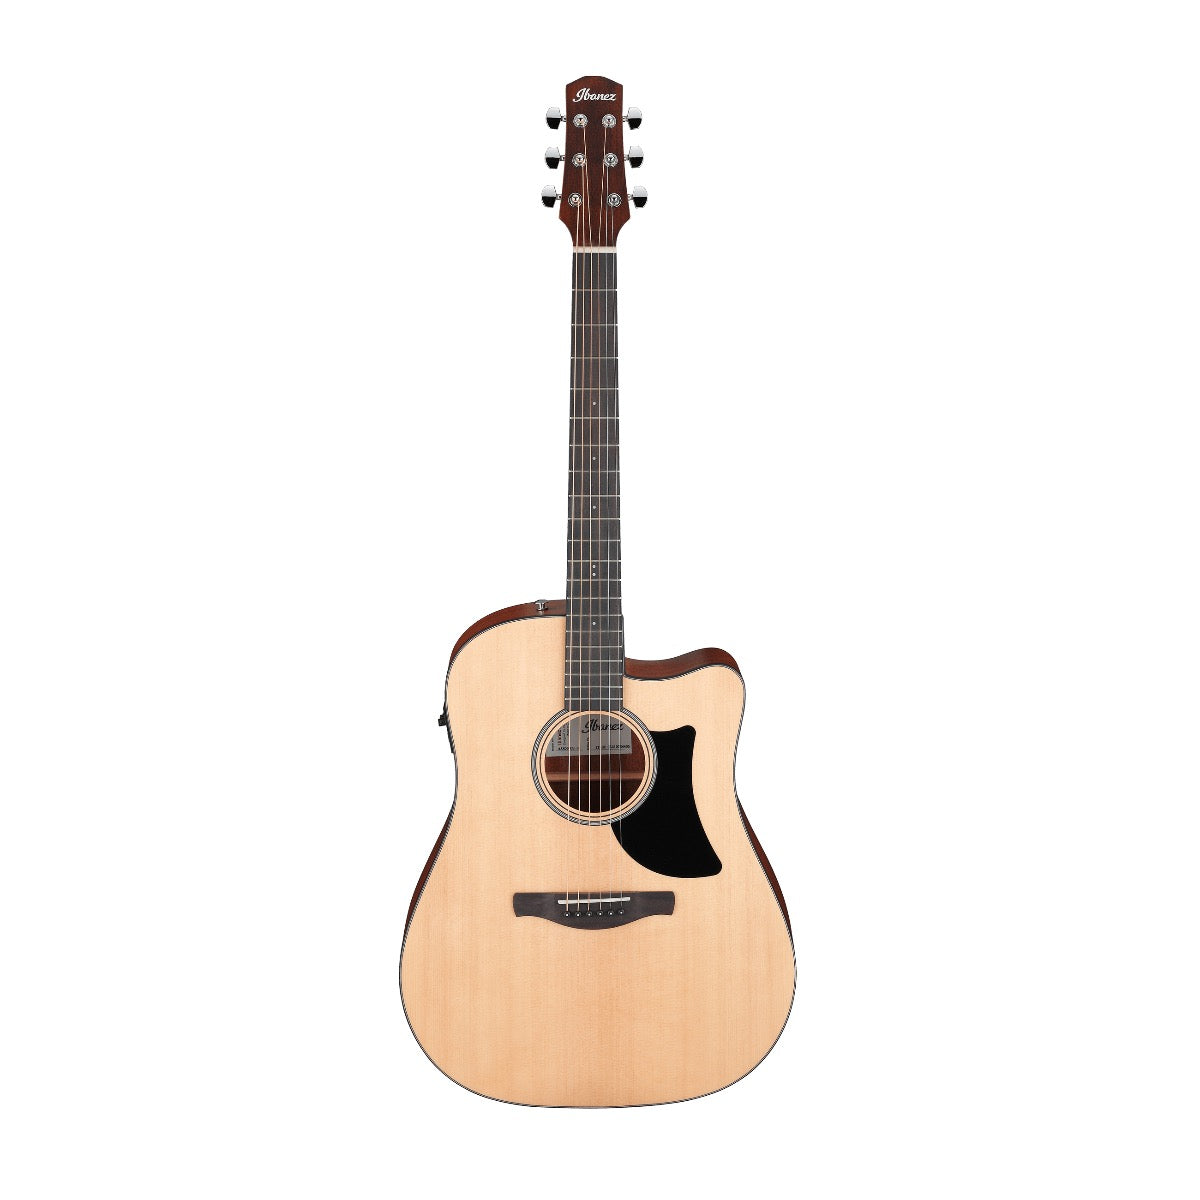 IBANEZ AAD50CELG Advanced Acoustic Cutaway with Electronics, Low Gloss finish, View 2